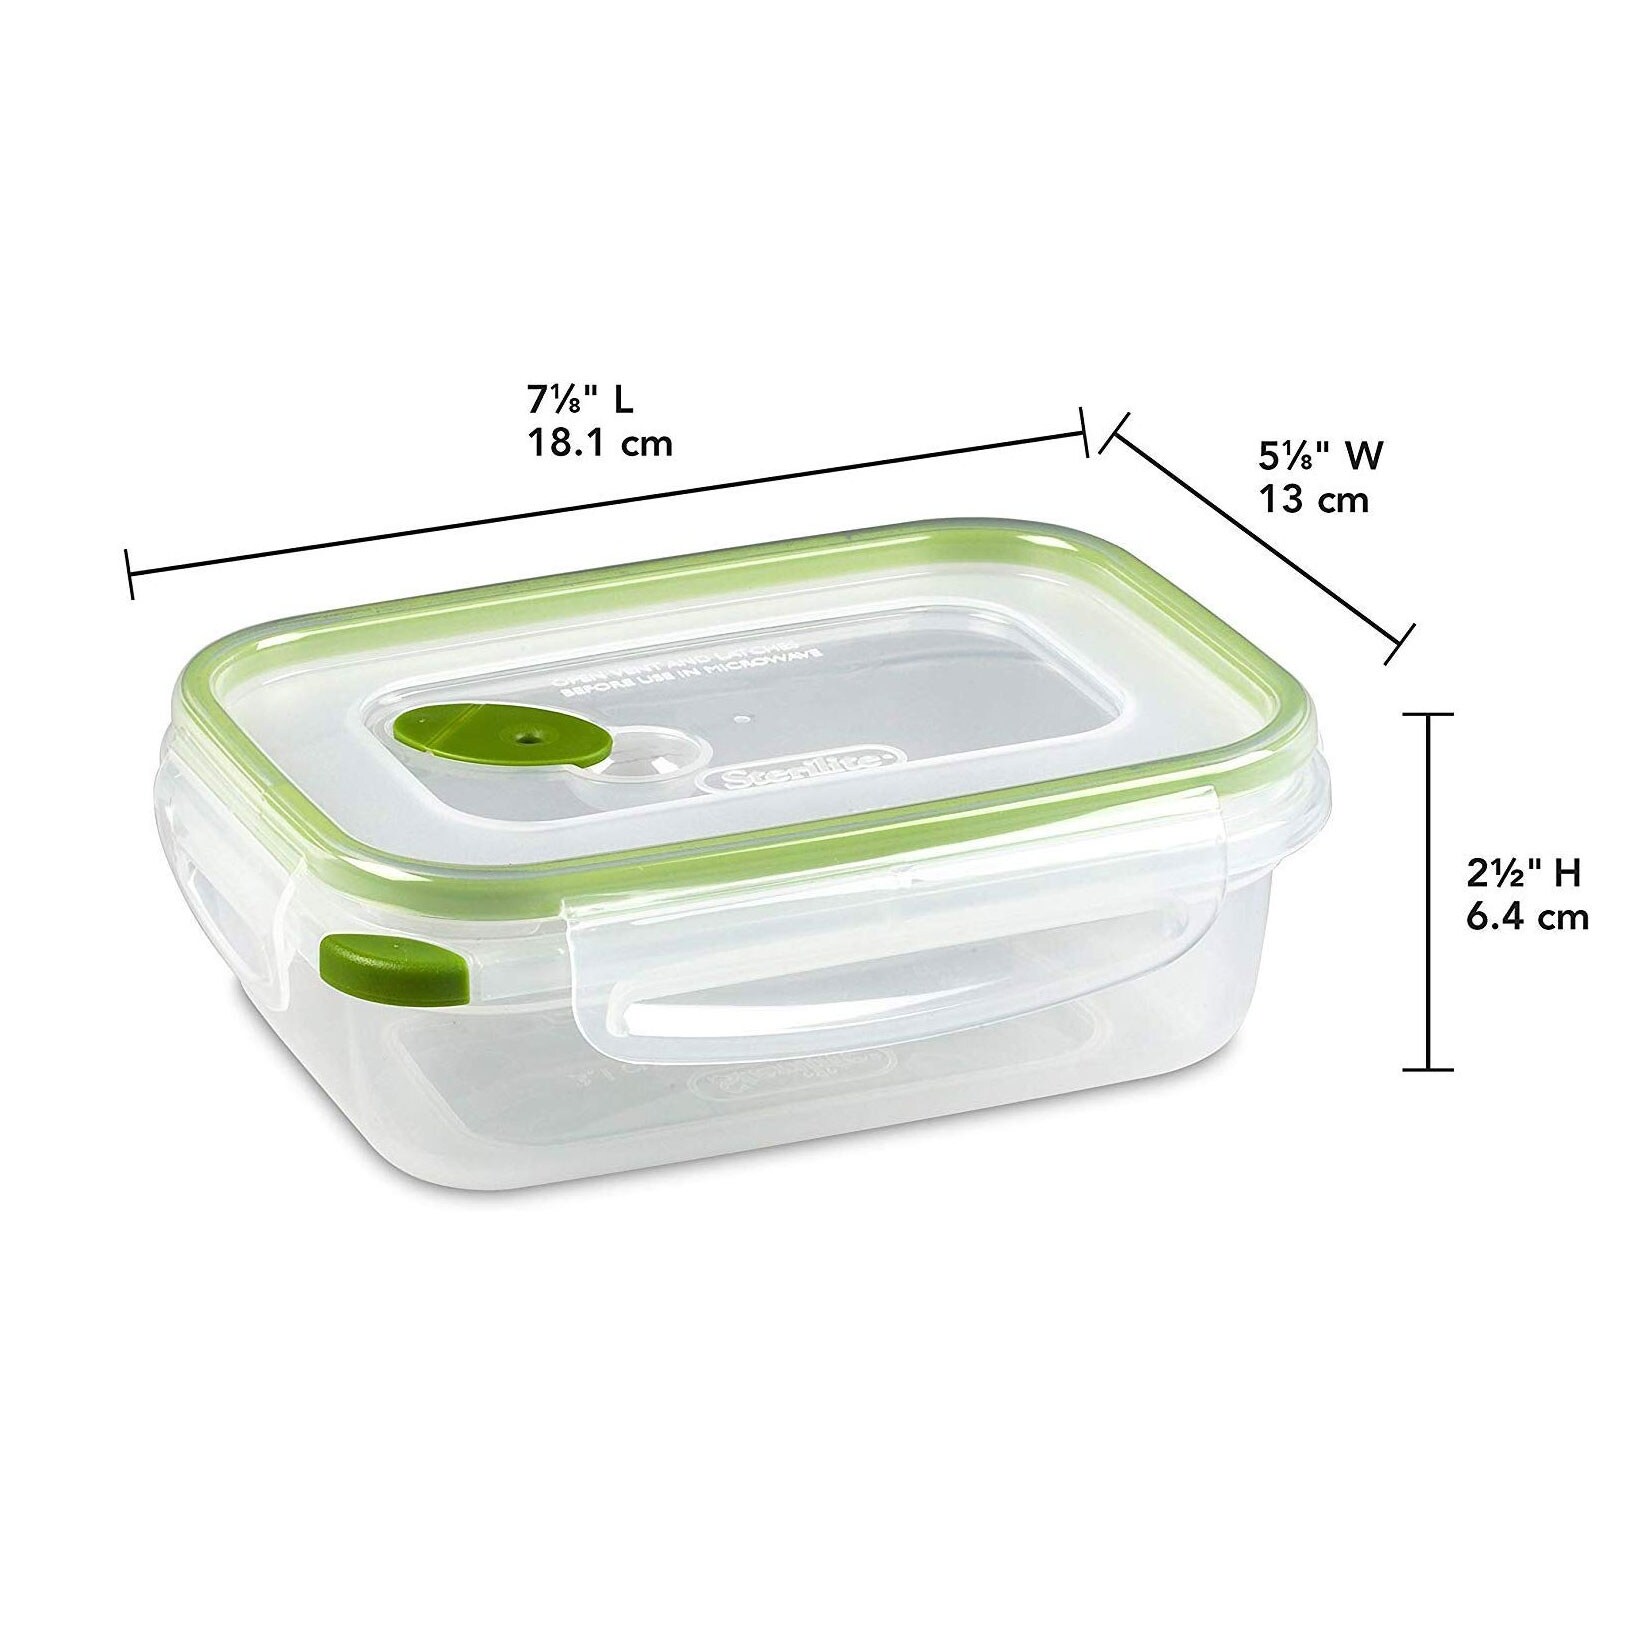 https://ak1.ostkcdn.com/images/products/is/images/direct/94ec3f15a40dd3ccfa715f557fe8e76bb9366065/Sterilite-3.1-Cup-Rectangular-UltraSeal-Food-Storage-Container%2C-Green-%2812-Pack%29.jpg